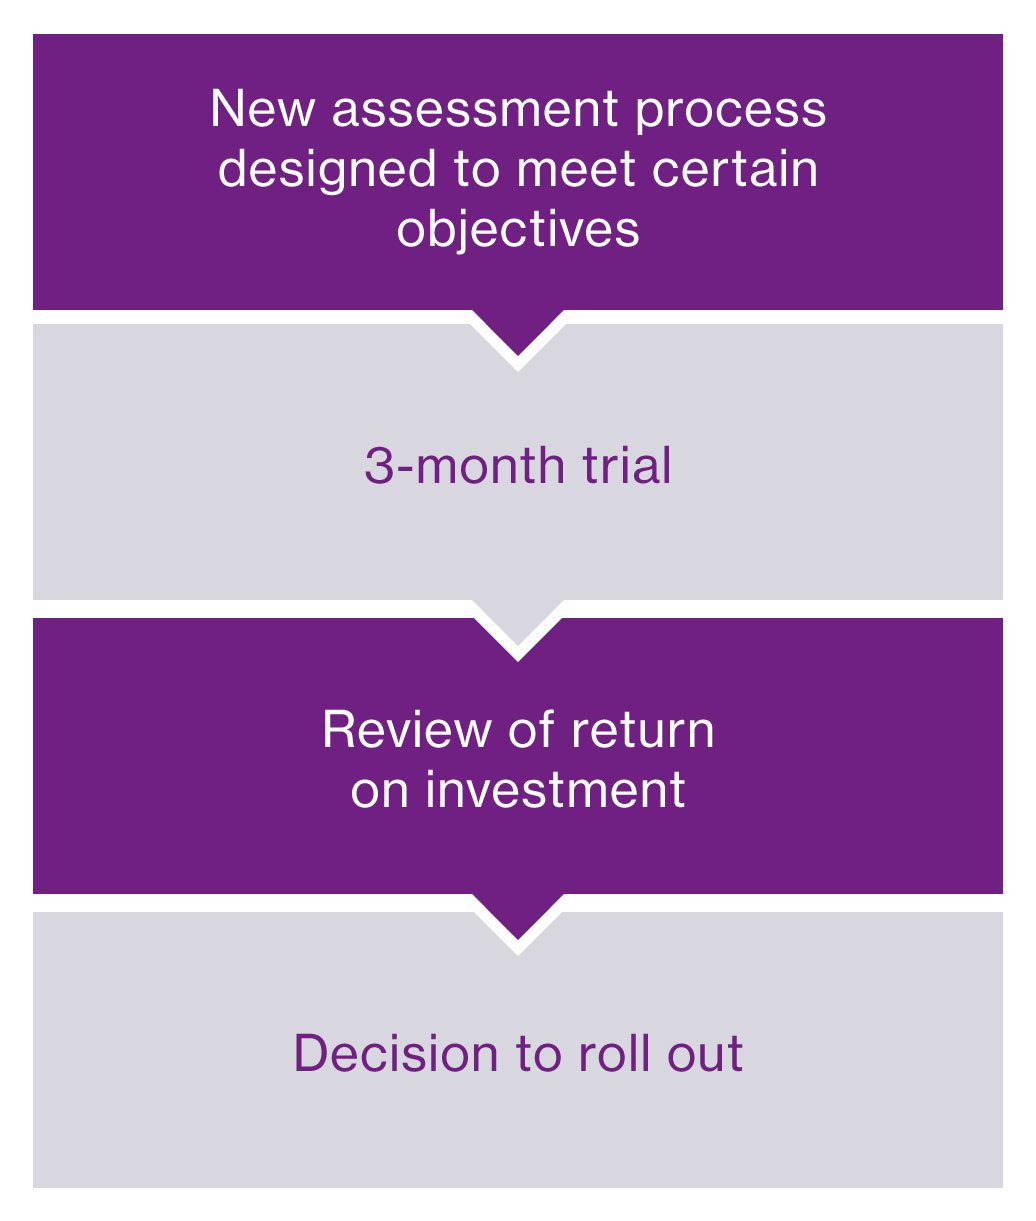 4 step process - meet objectives, trial, review ROI and roll out